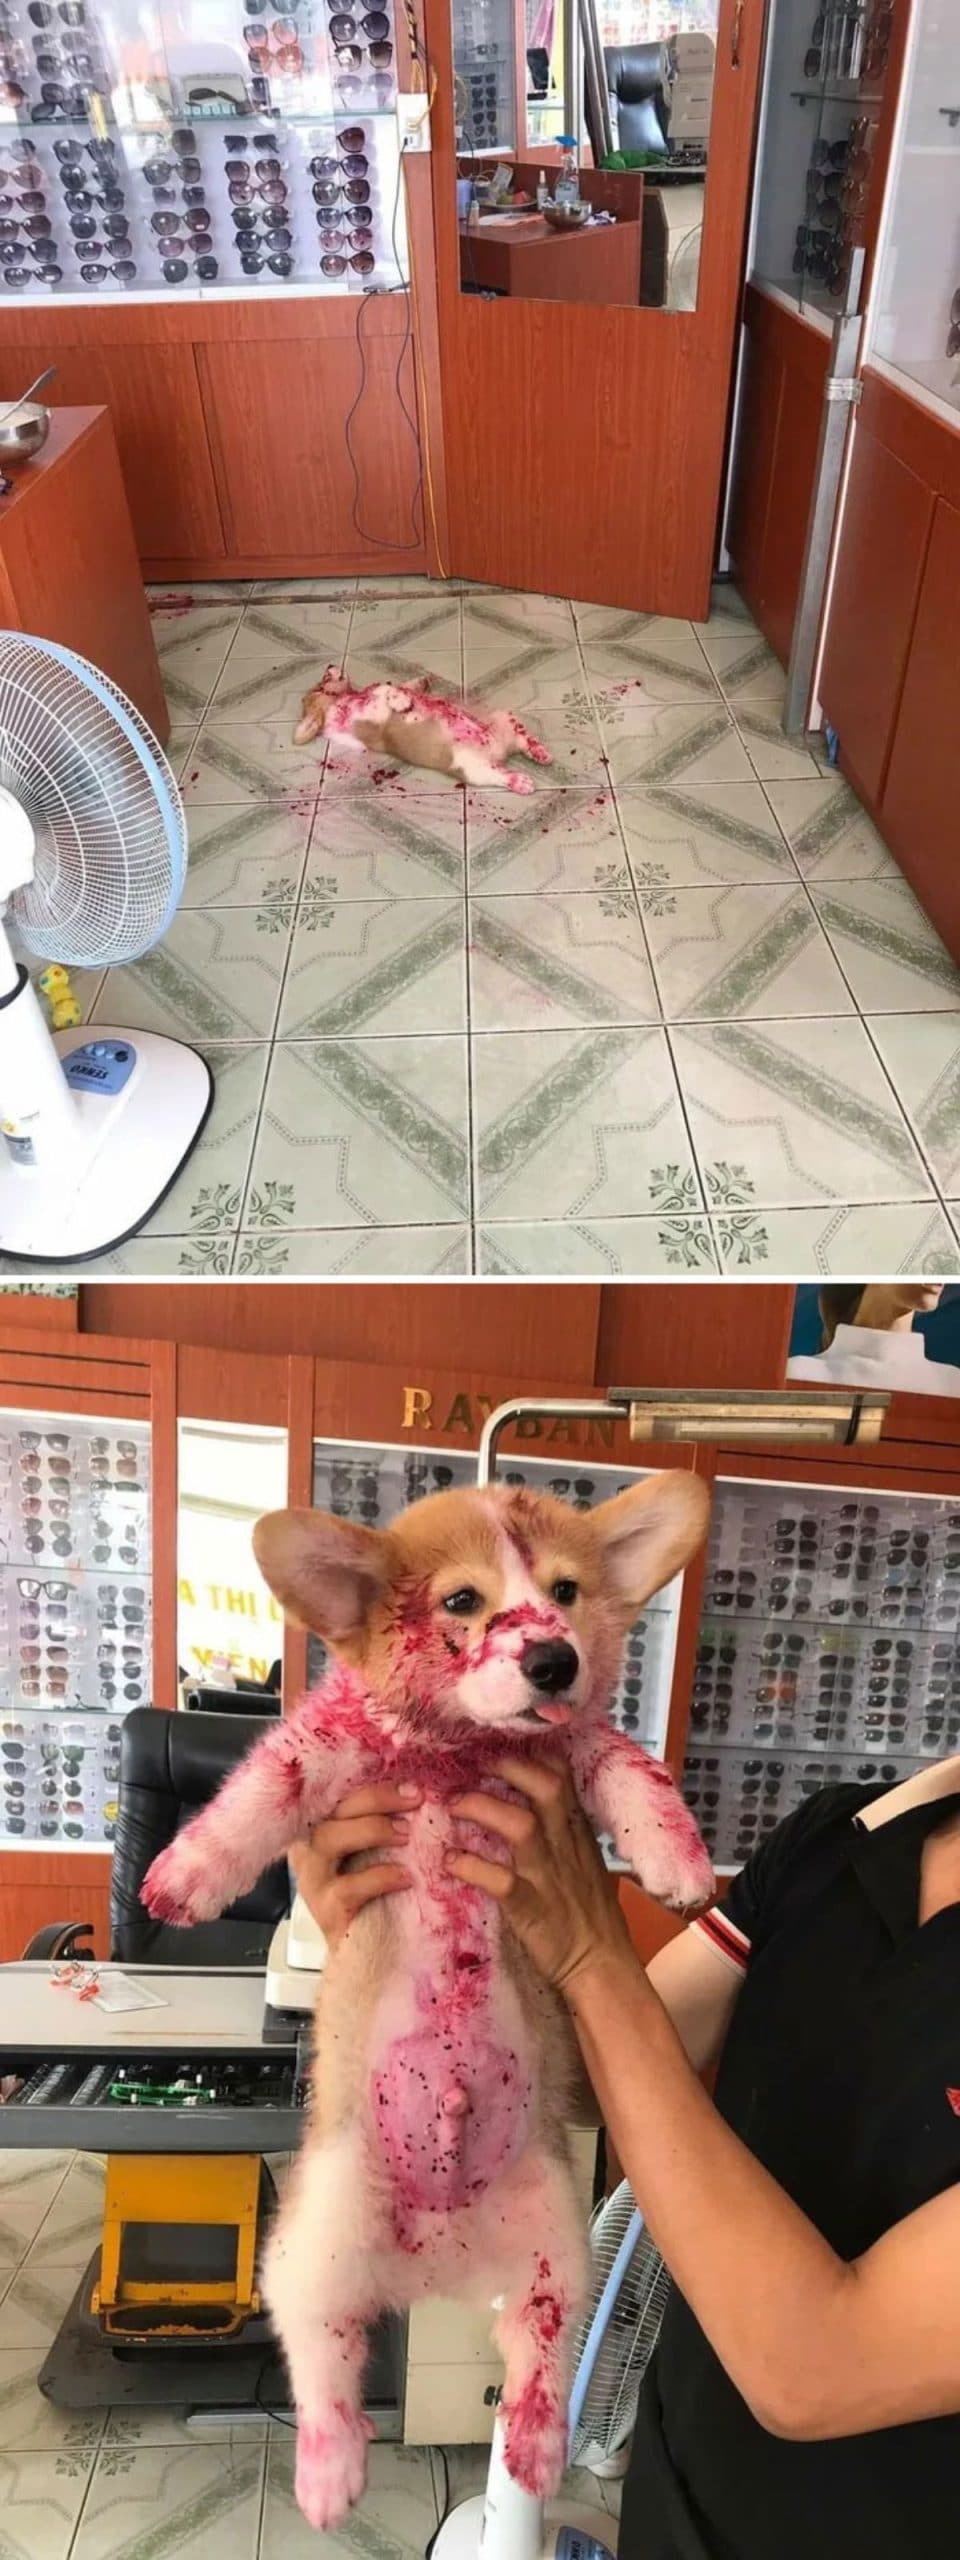 brown and white corgi puppy covered in red dragonfruit juice being held up by someone